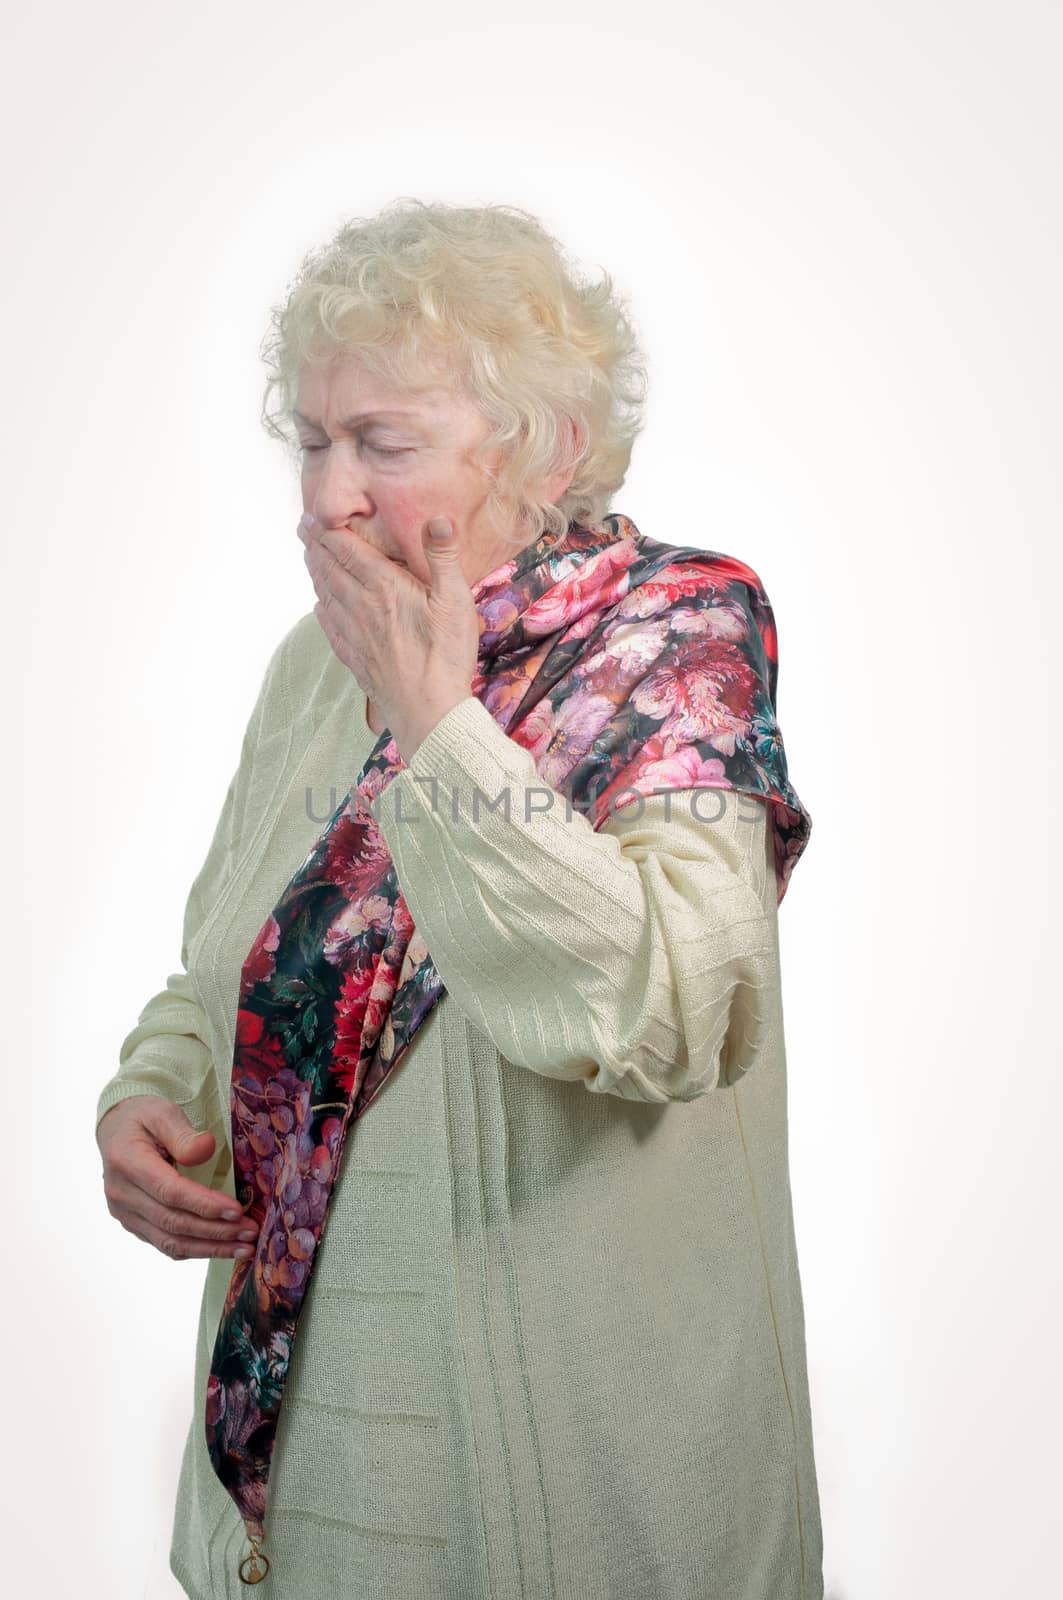 Portrait of an elderly woman coughs on a white background.